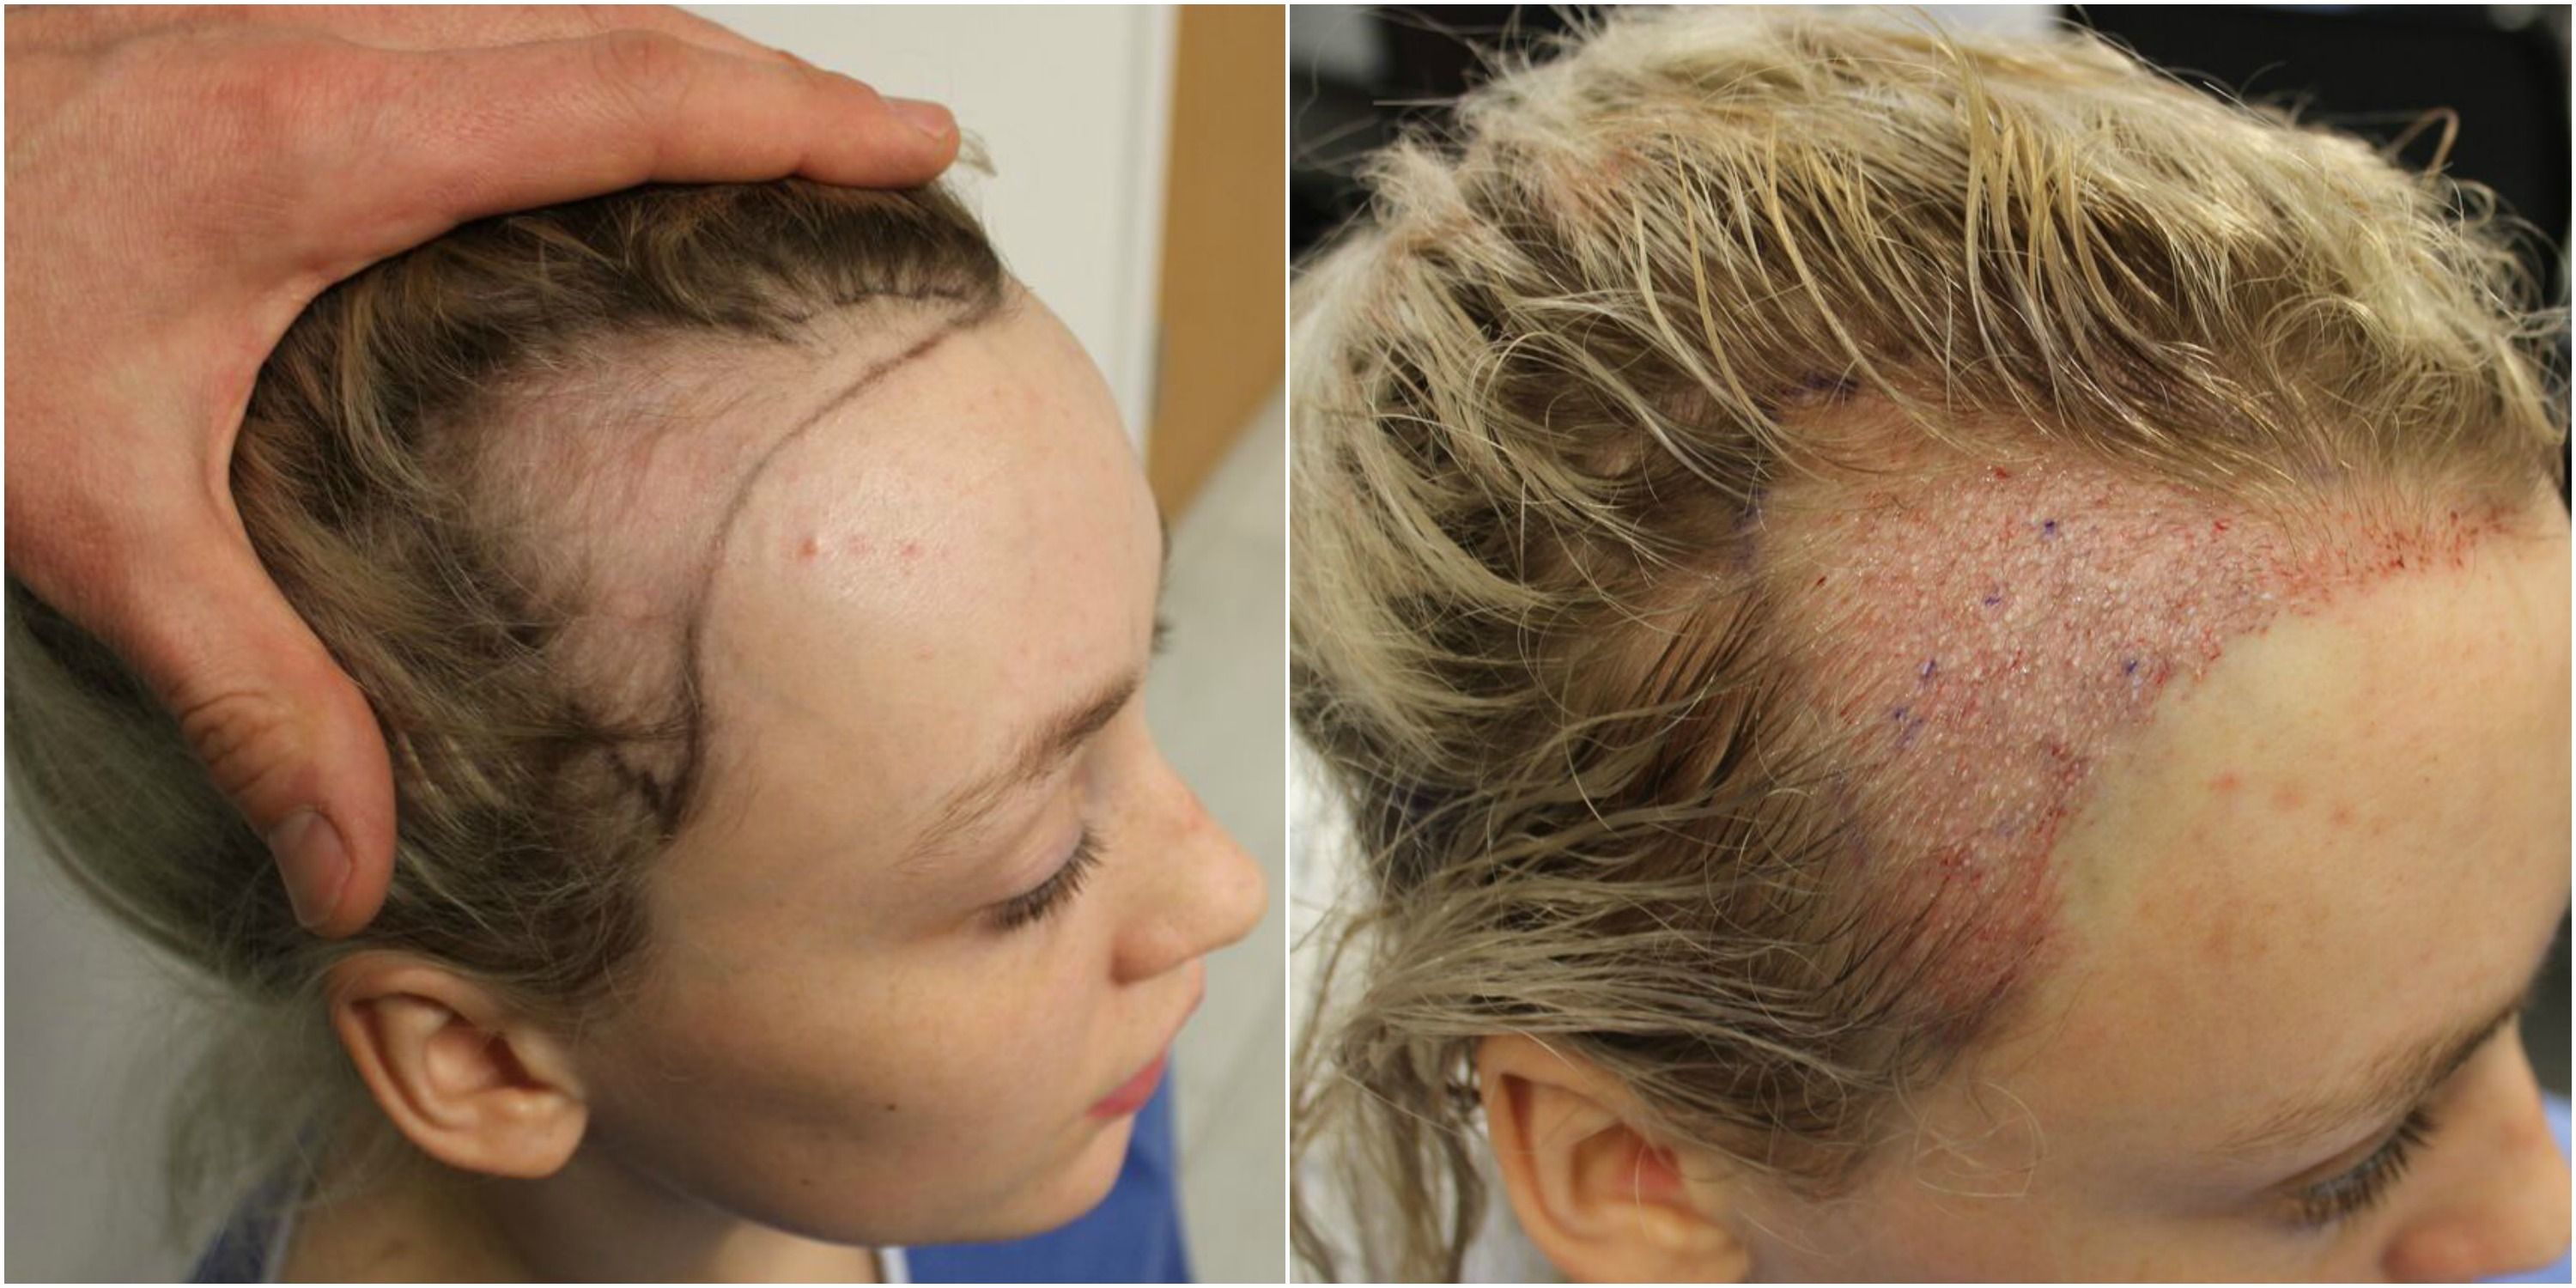 Ballerina Loses Her Hair to Traction Alopecia Due to Tight Bun, Gets  Follicular Transplant